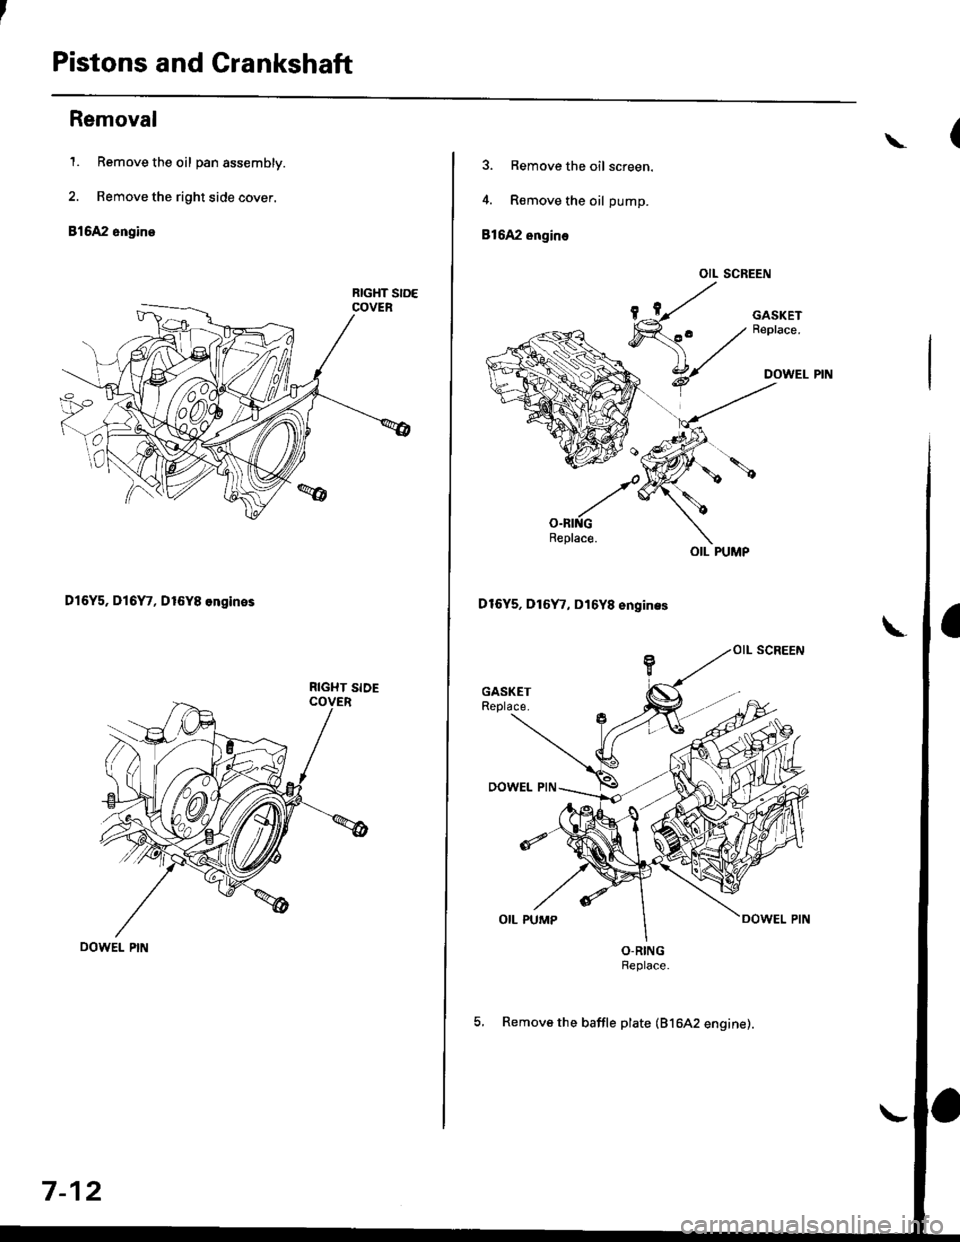 HONDA CIVIC 1997 6.G Owners Guide Pistons and Crankshaft
Removal
1. Remove the oil pan assembly.
2. Remove the right side cover.
816A2 engine
D16Y5, Dl6Y7, D16Y8 ongines
RIGHT SIDE
7-12
\
3. Remove the oil screen.
4. R€move the oil 